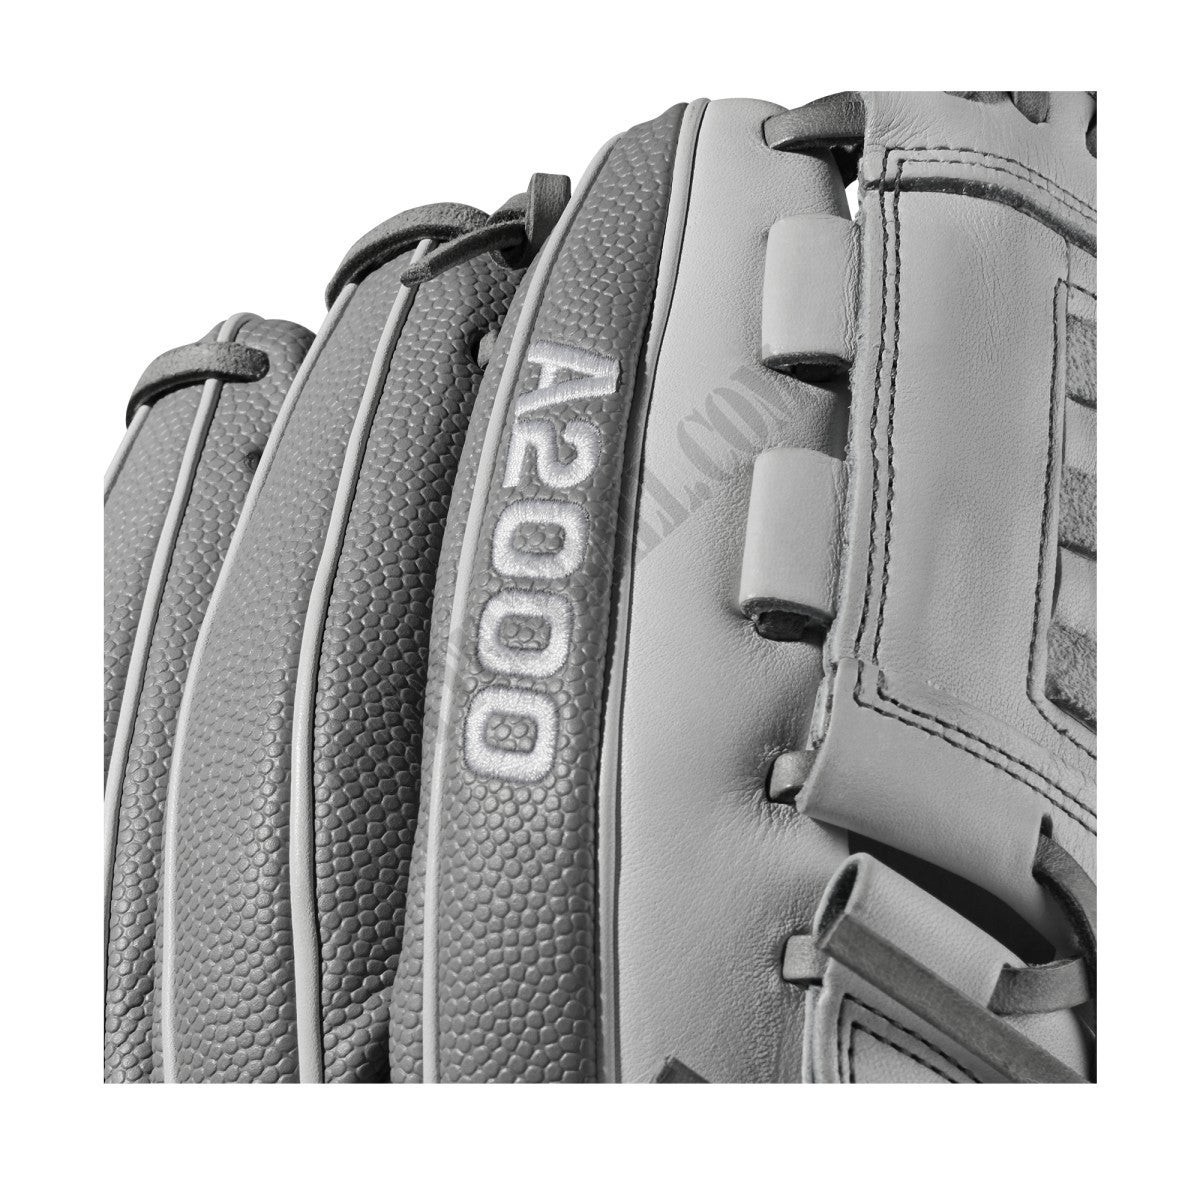 2019 A2000 P12 12" Pitcher's Fastpitch Glove ● Wilson Promotions - -6